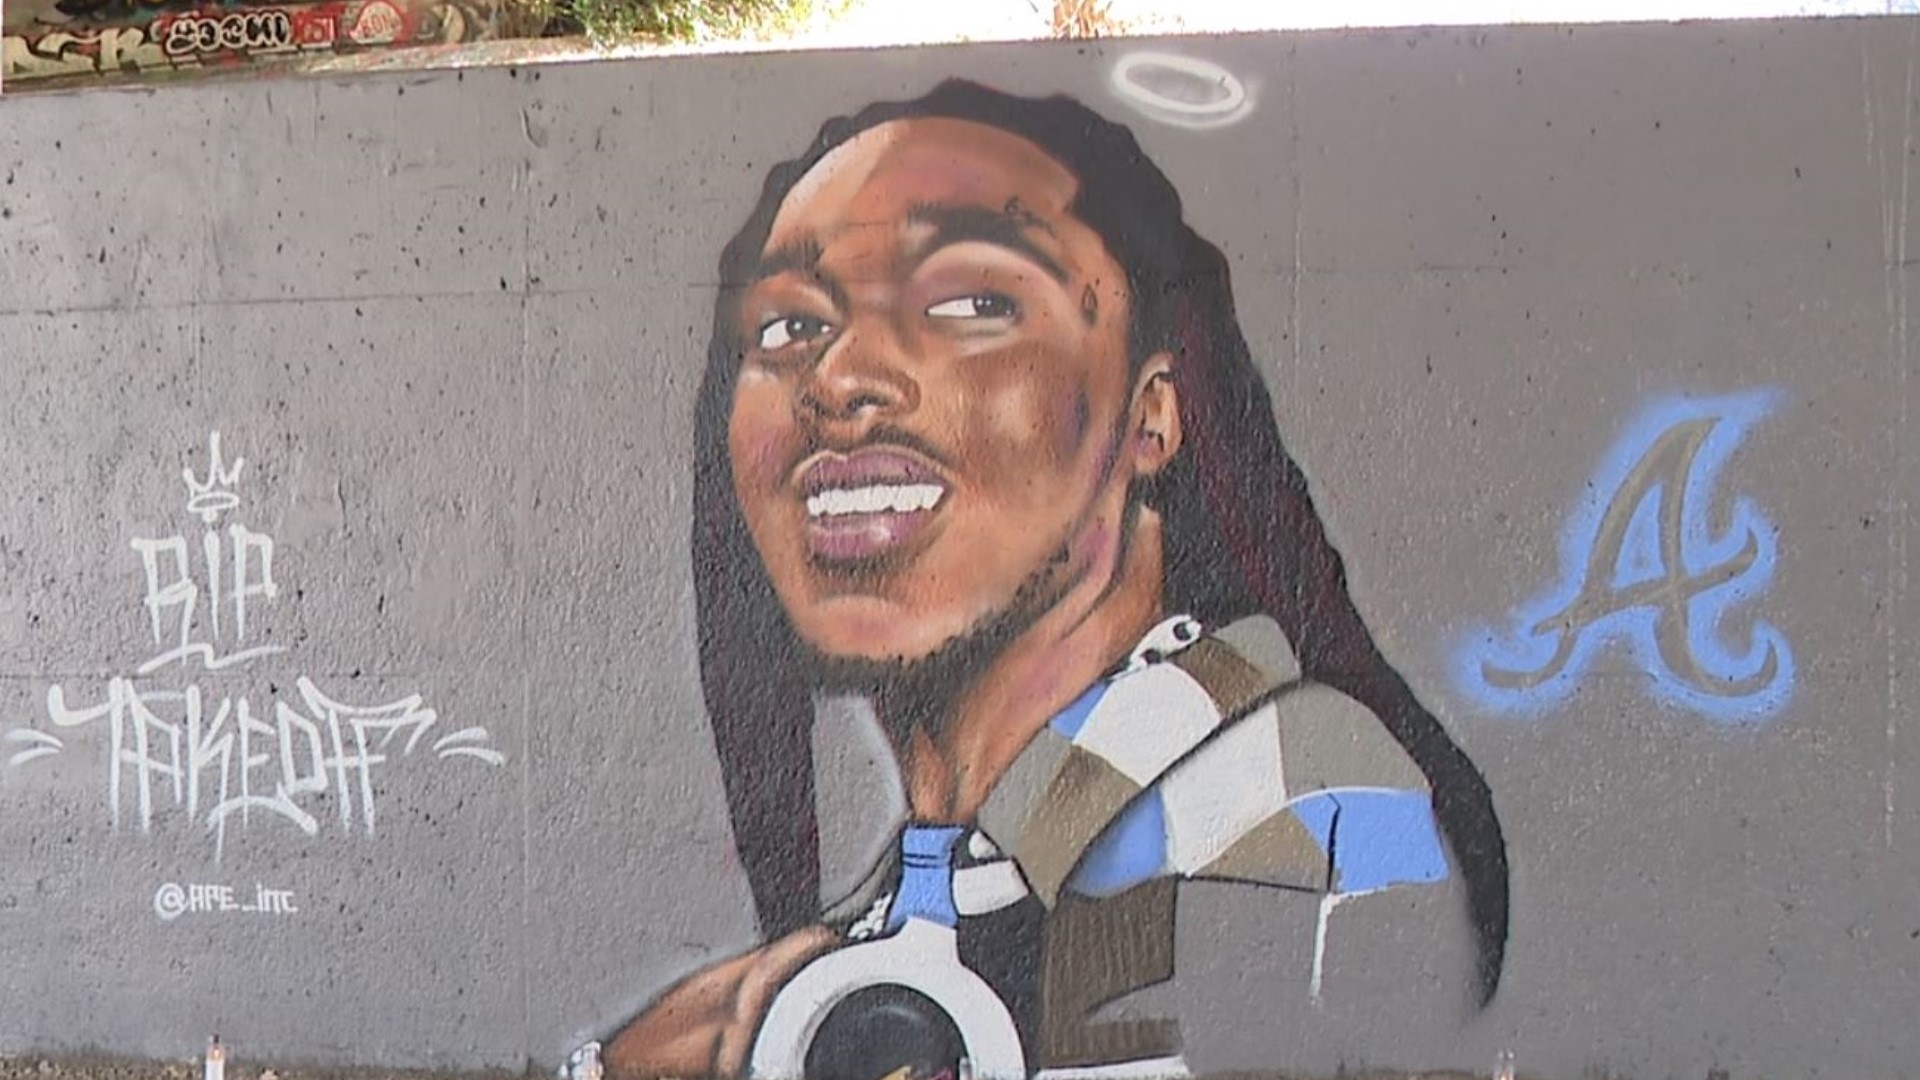 A pair of local artists painted the mural this week in tribute to the Migos rapper who died in a Houston shooting.